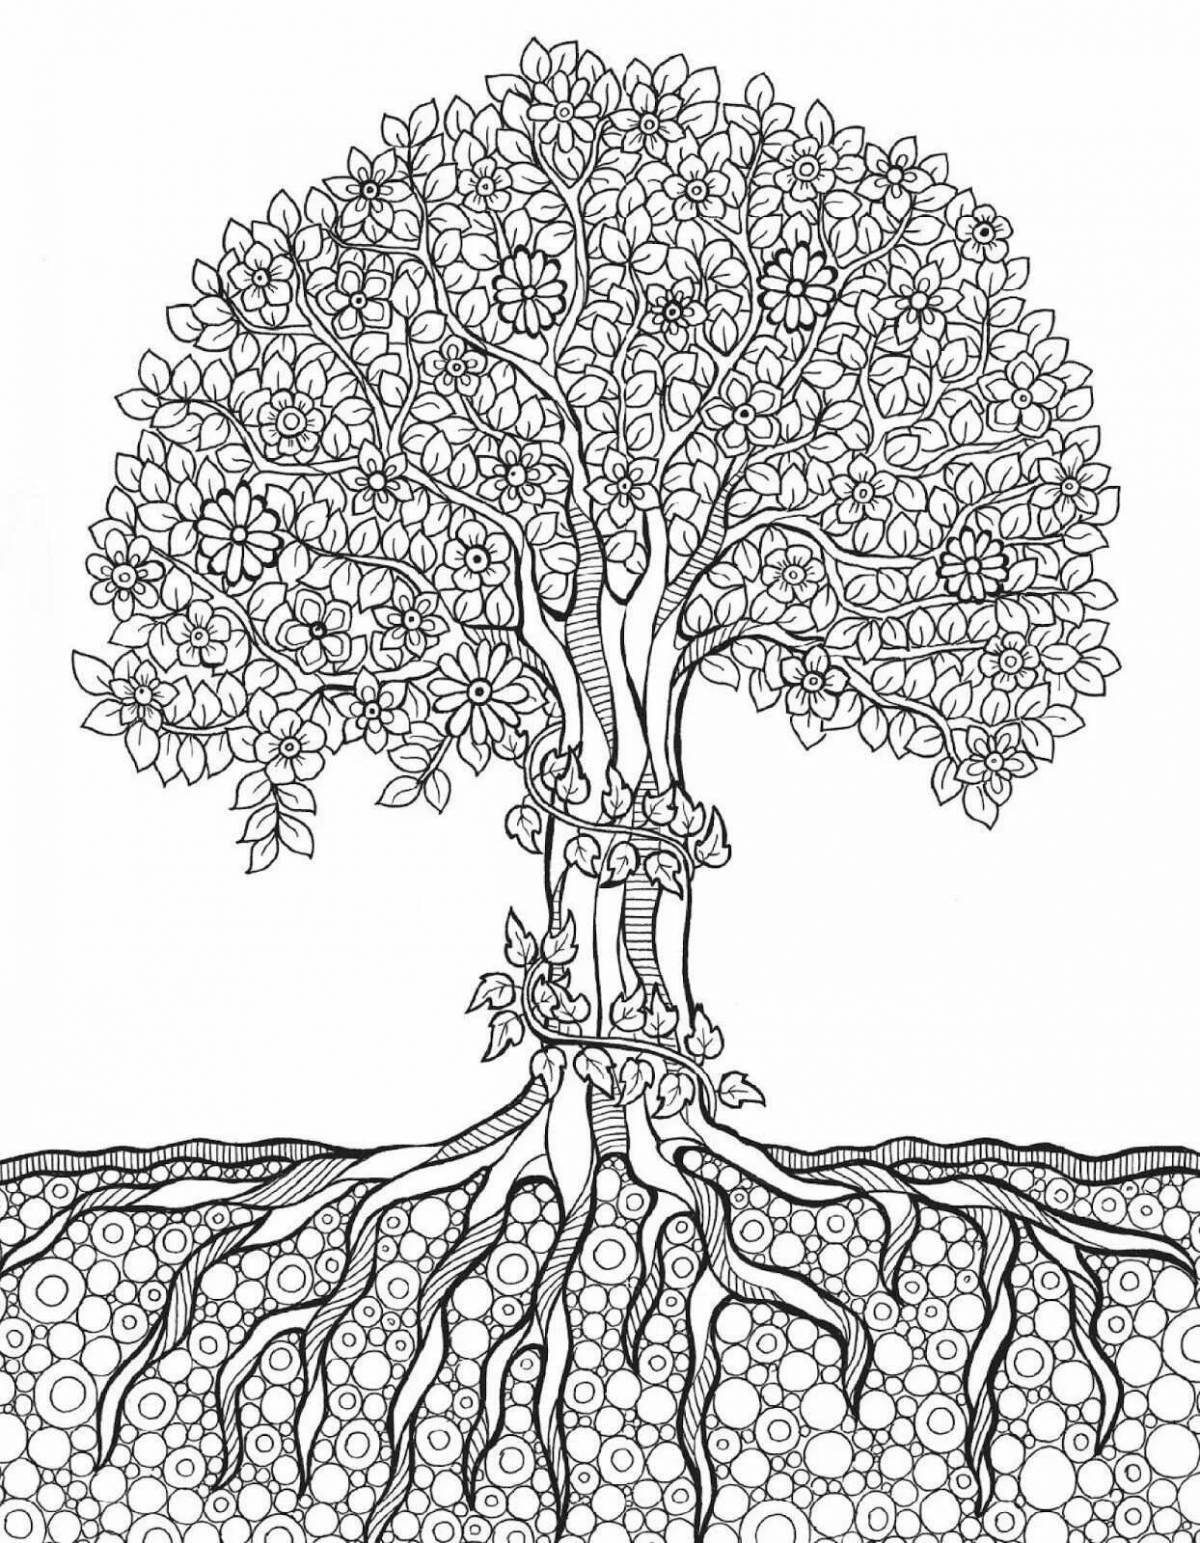 Sublime coloring page beautiful tree